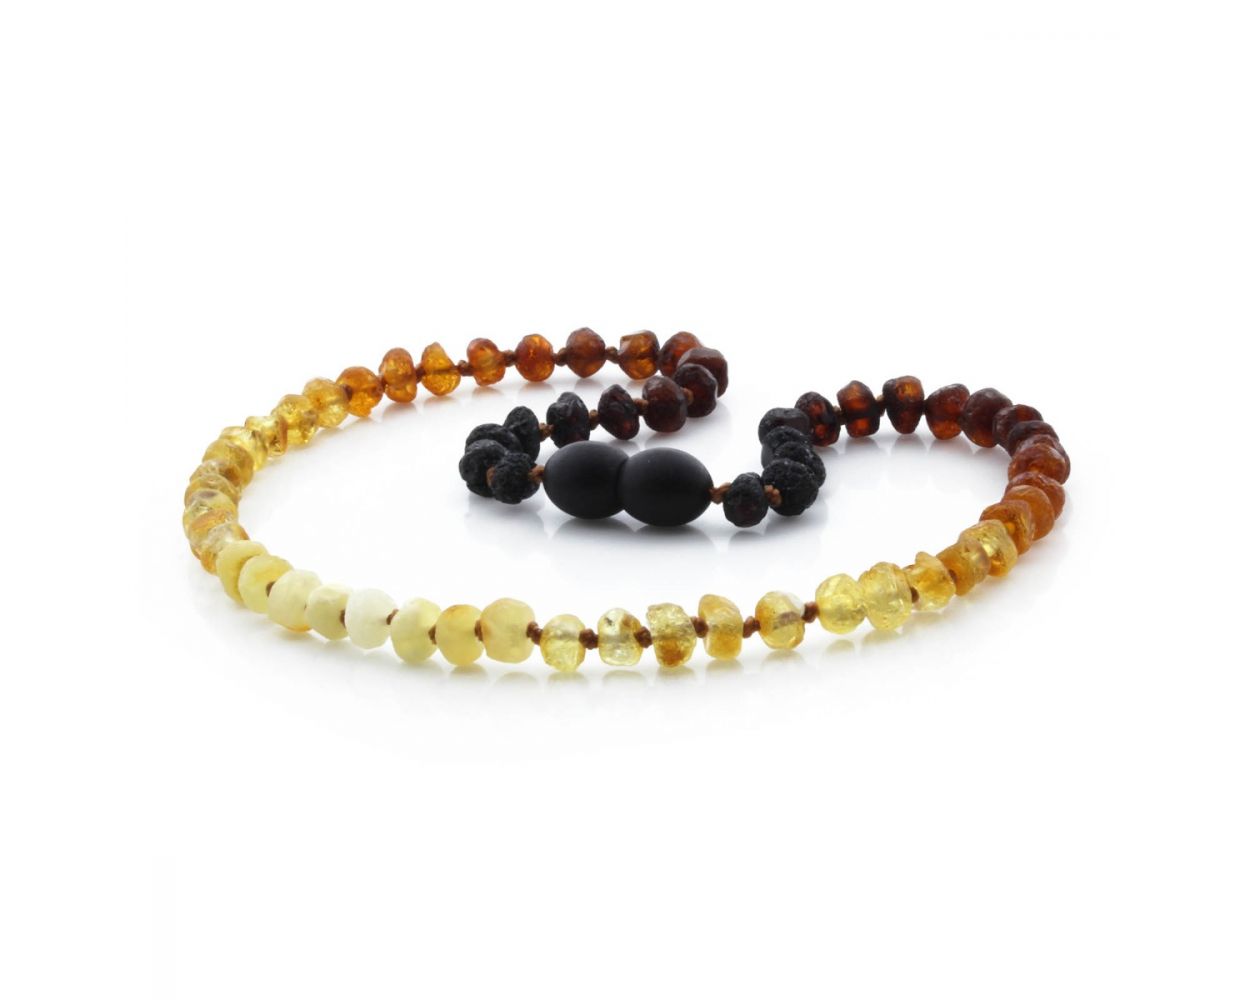 Baby Amber Teething Necklace for Teething Infant or Toddler - Honey –  Cherished Moments Jewelry